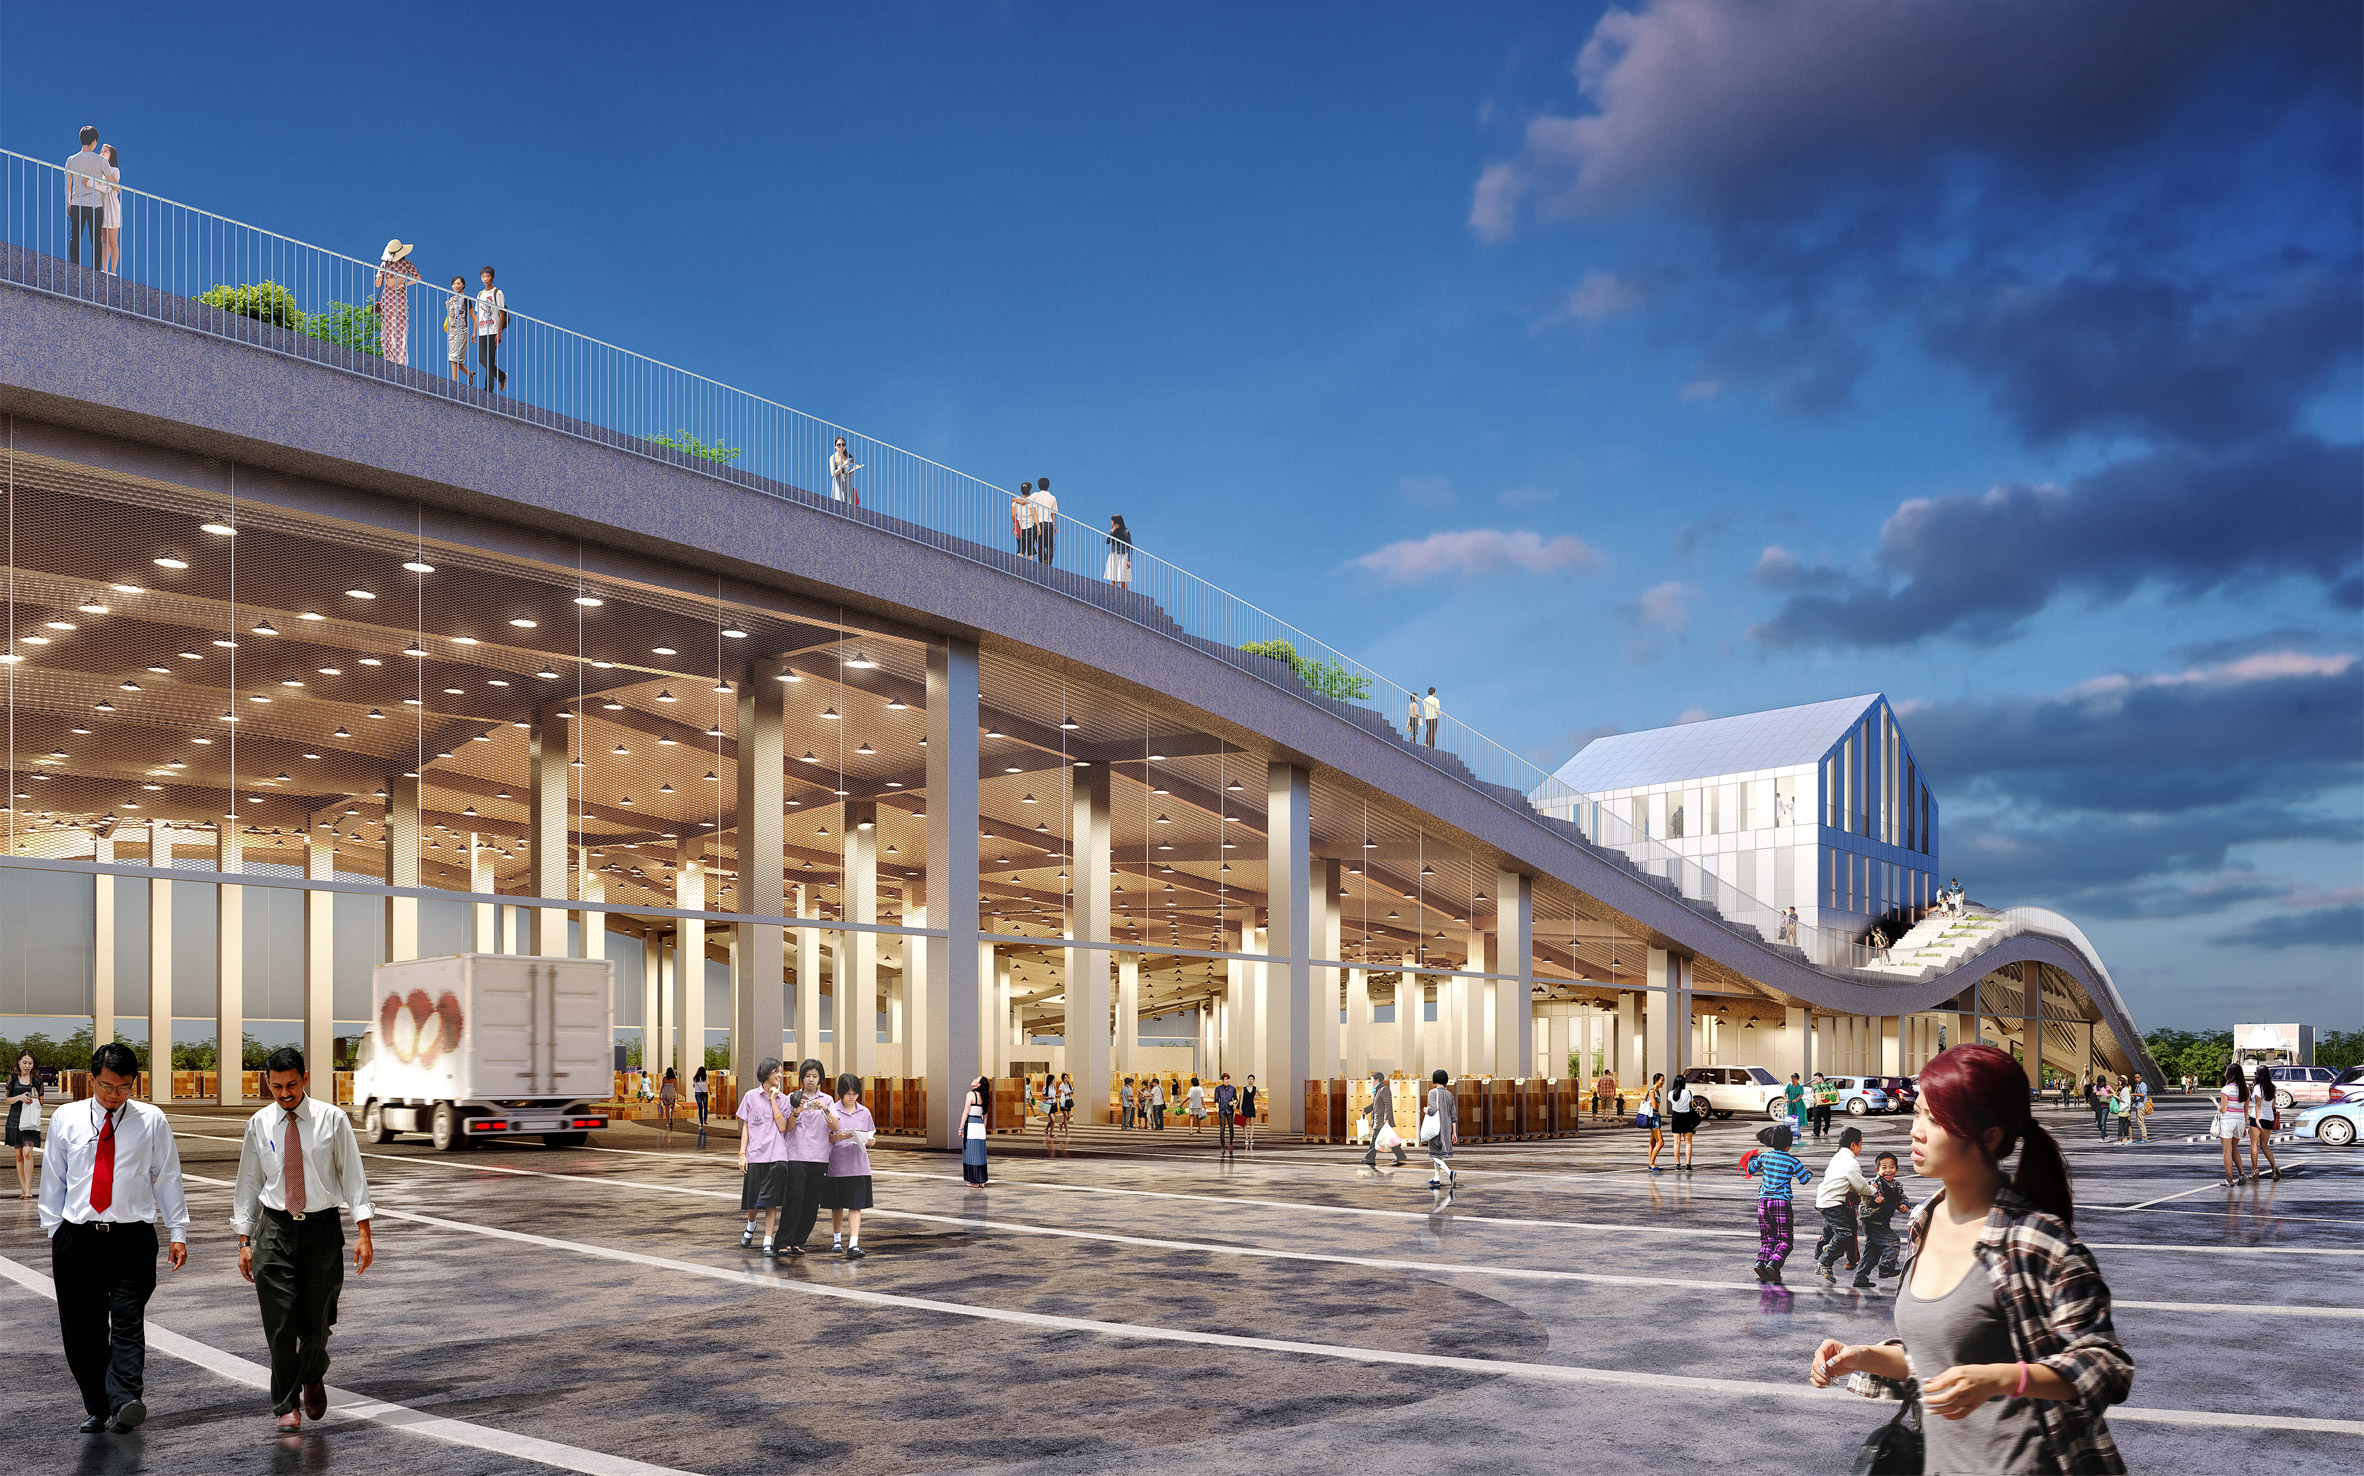 Tainan Xinhua Fruit and Vegetable Market by MVRDV will have rooftop farm